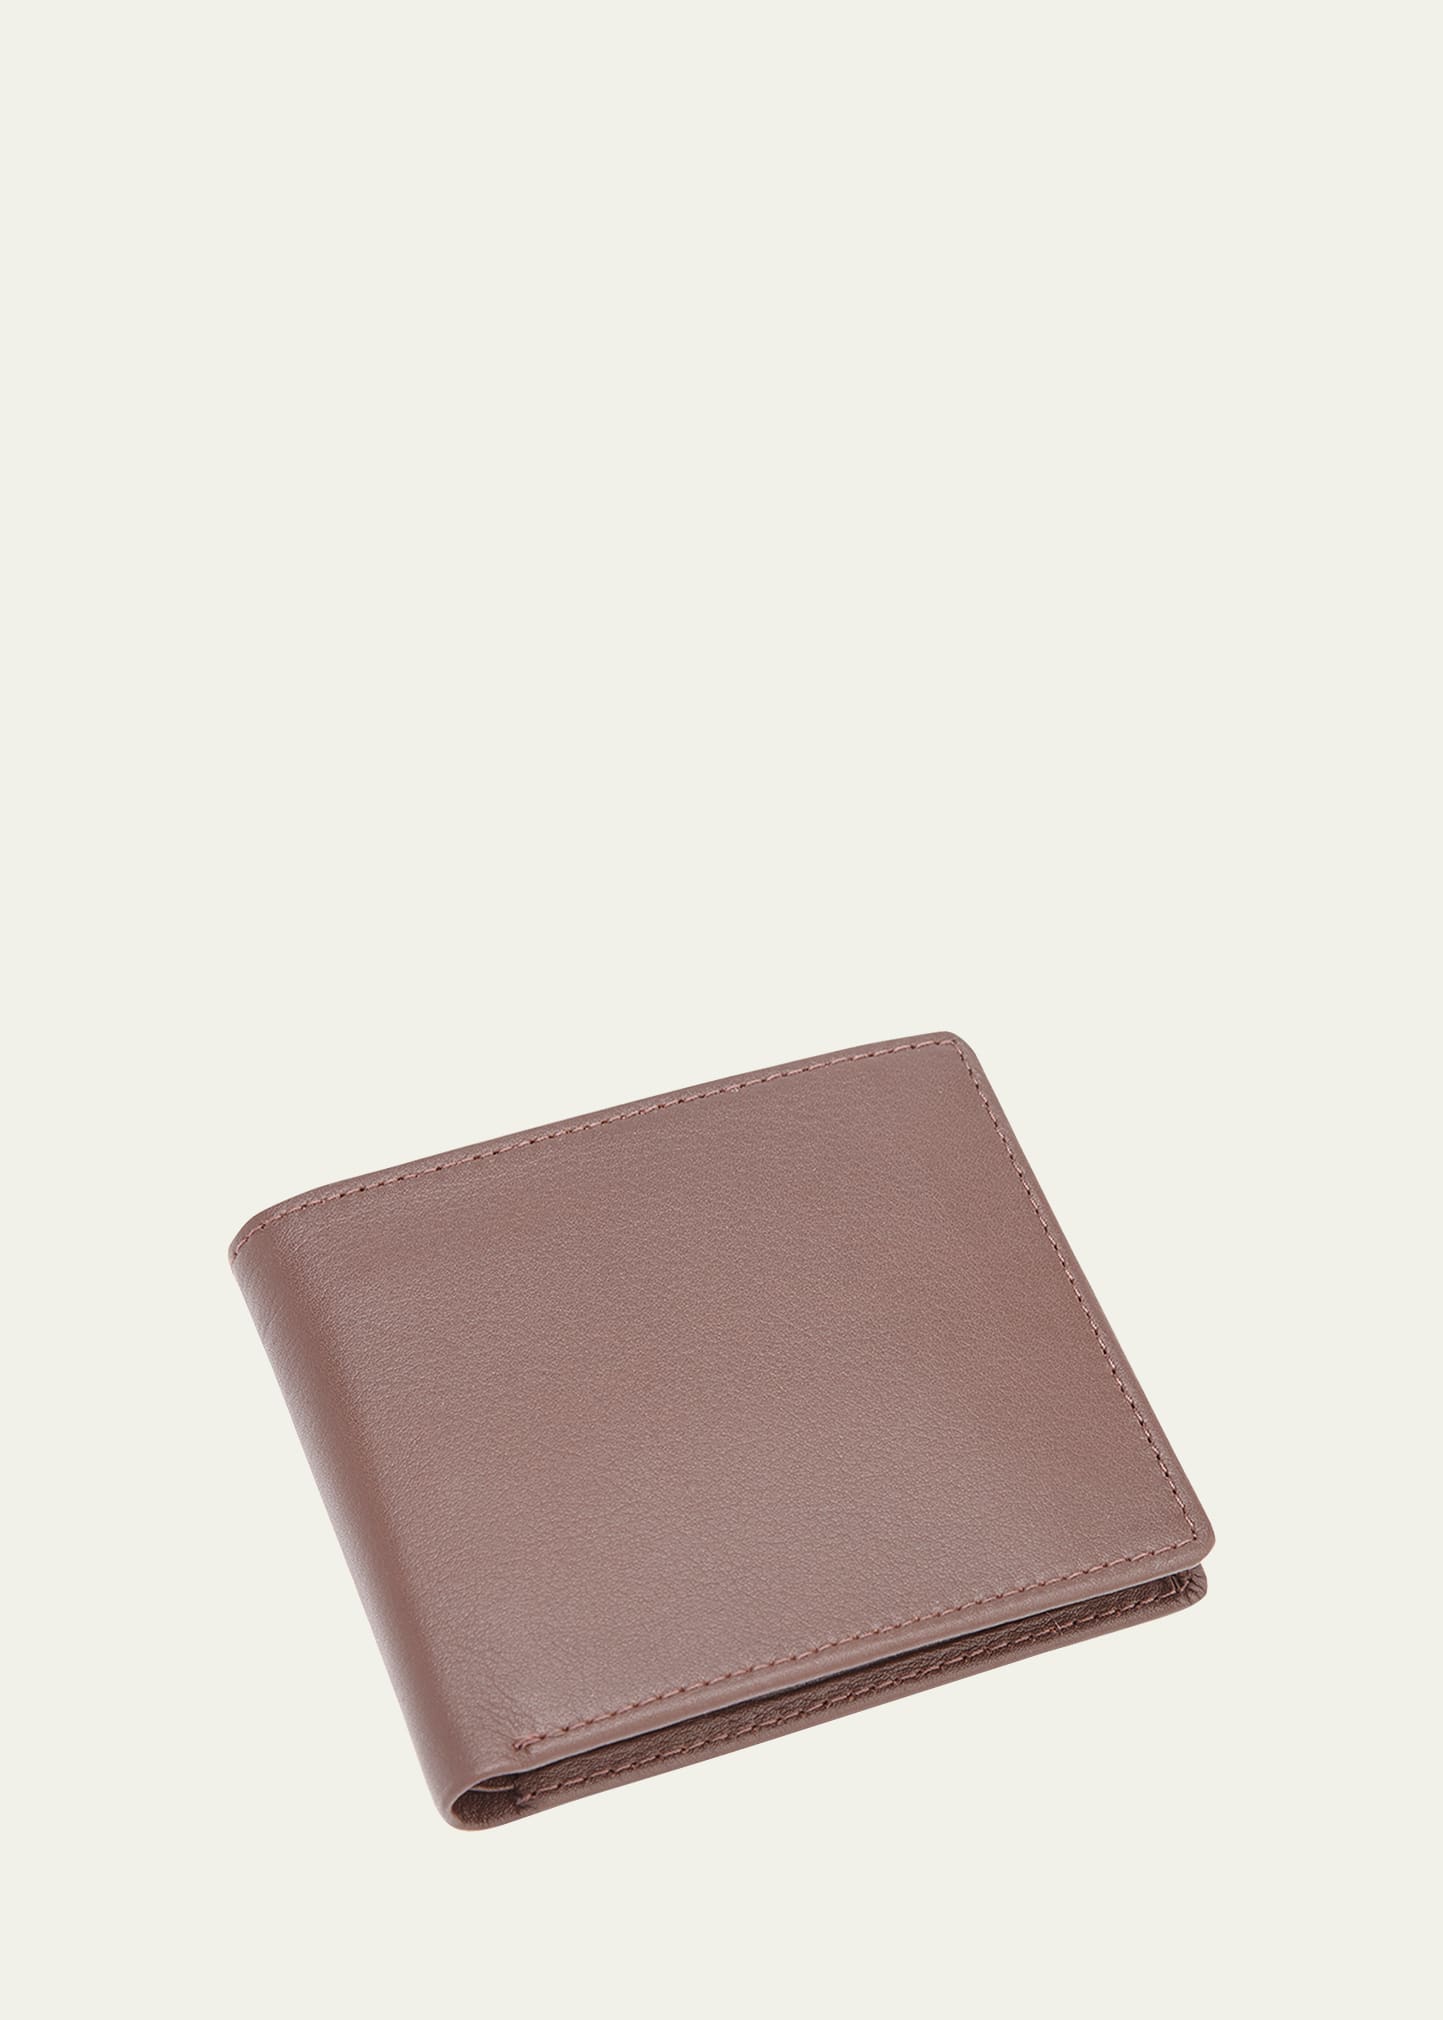 Royce New York Personalized Leather Rfid-blocking Trifold Wallet In Brown